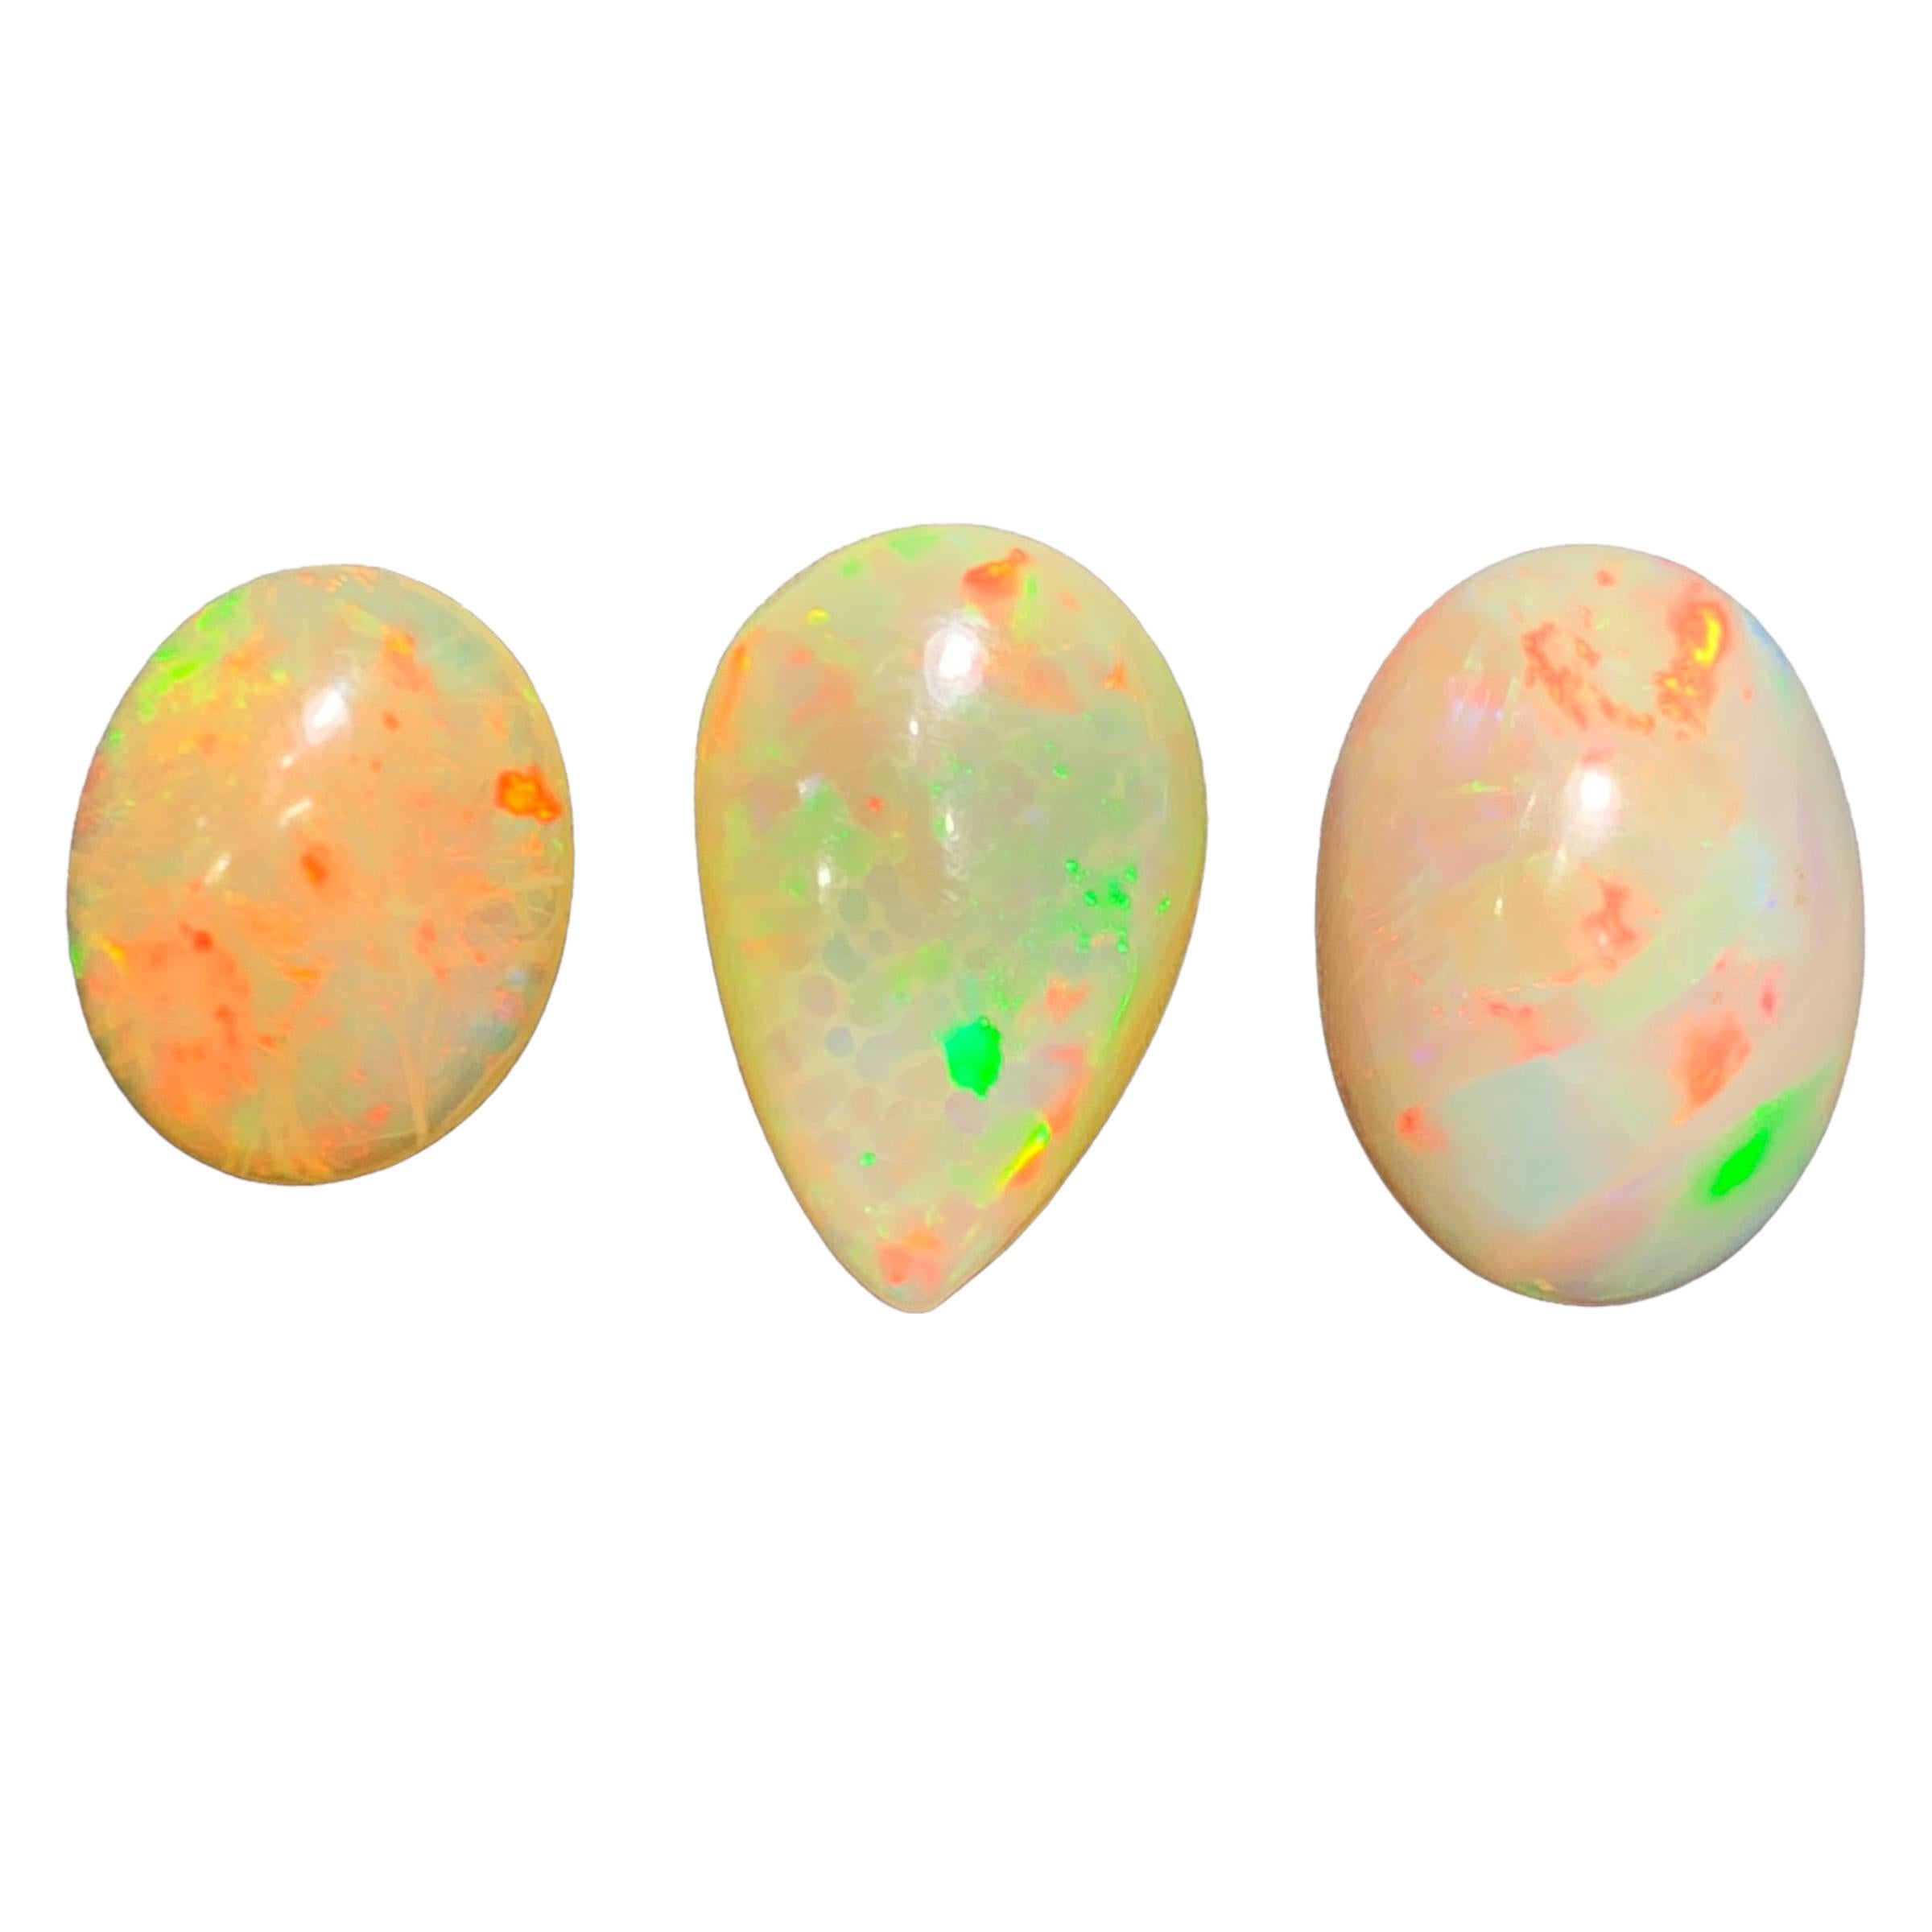 GEMSTONE TYPE: Opal
PIECE(S): 3
WEIGHT: 20 Carats
SHAPE: Oval and Pear Shape Cabochons
SIZE (MM): 
4.20 Ct: 15.06 x 12.14 x 5.93
7.70 Ct: 19.13 x 12.56 x 5.97
8.10 Ct: 18.47 x 13.01 x 7.16
COLOR: Orange Half White
CLARITY: Opaque Play of